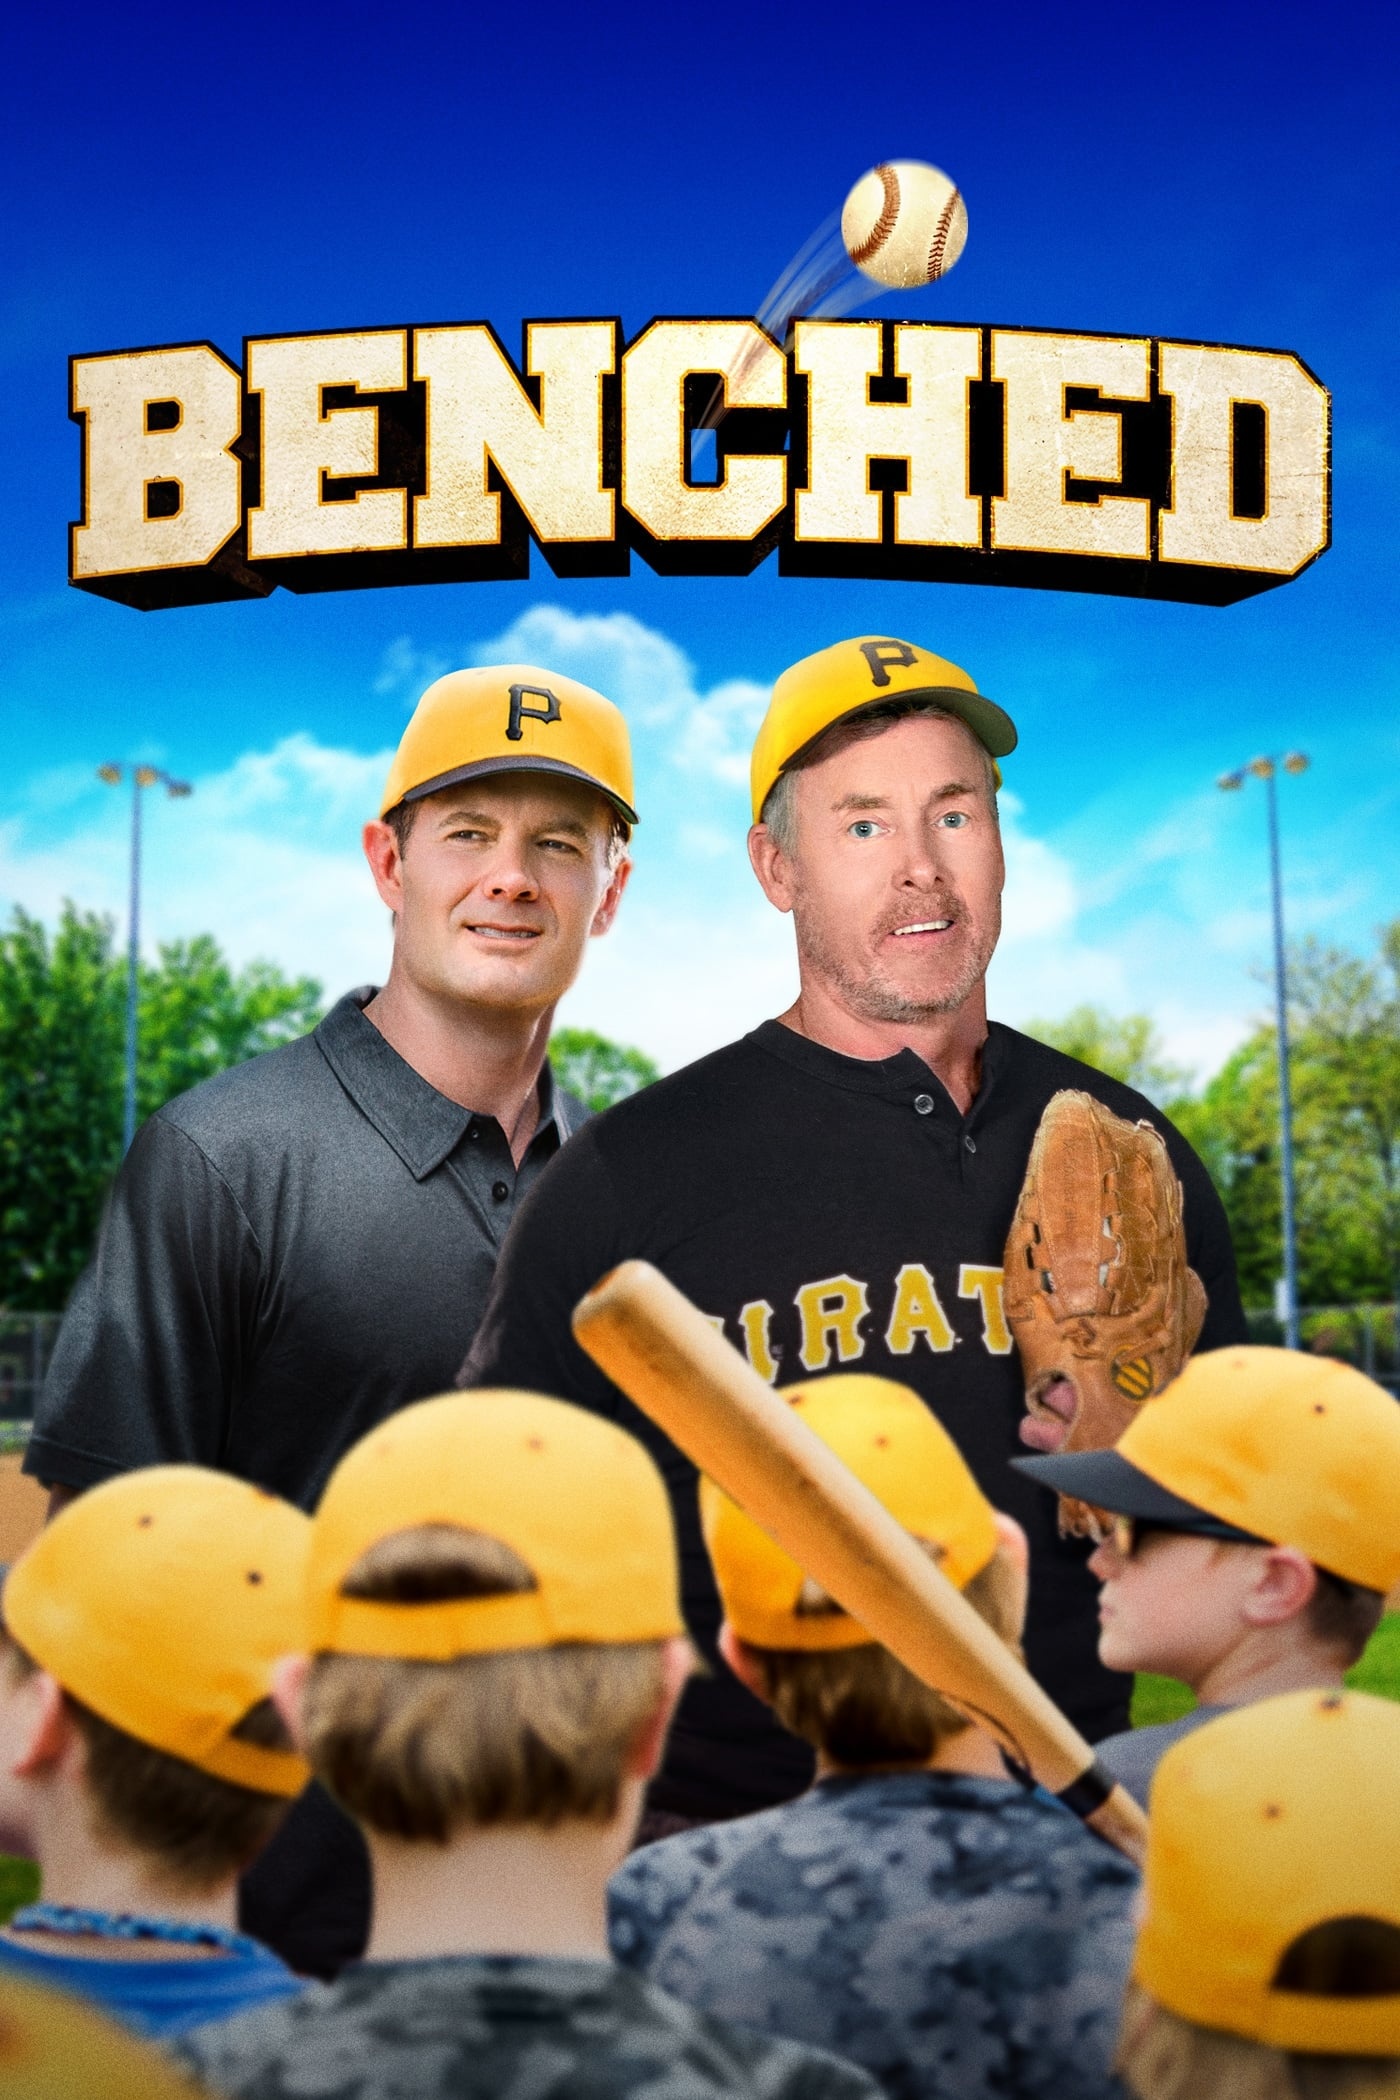 John C. McGinley: An American actor who played Don in a 2018 American sports drama film Benched. 1400x2100 HD Wallpaper.